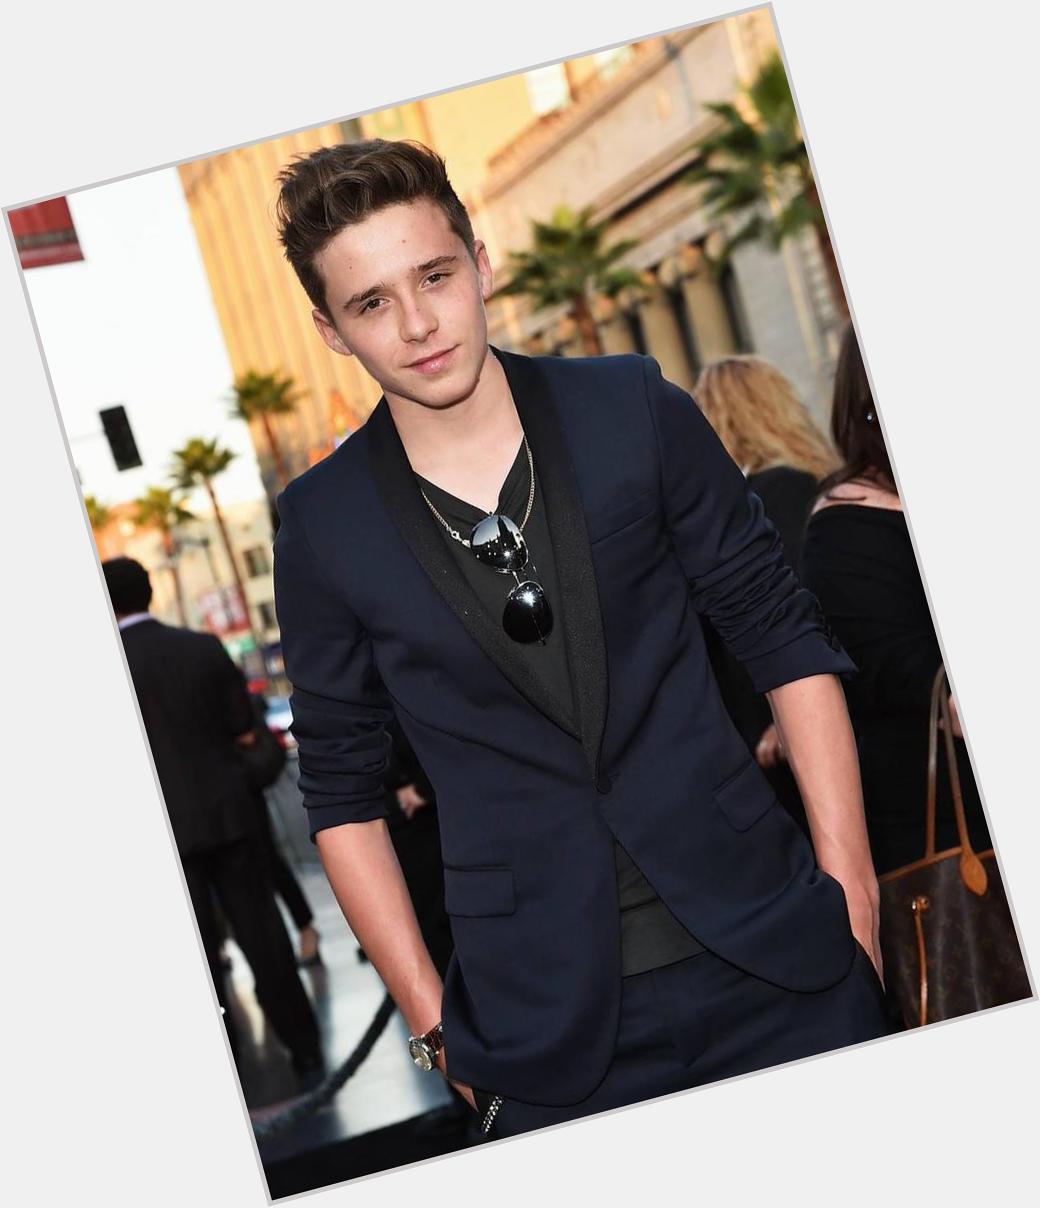 Happy birthday to this beautiful human being known as Brooklyn Beckham  